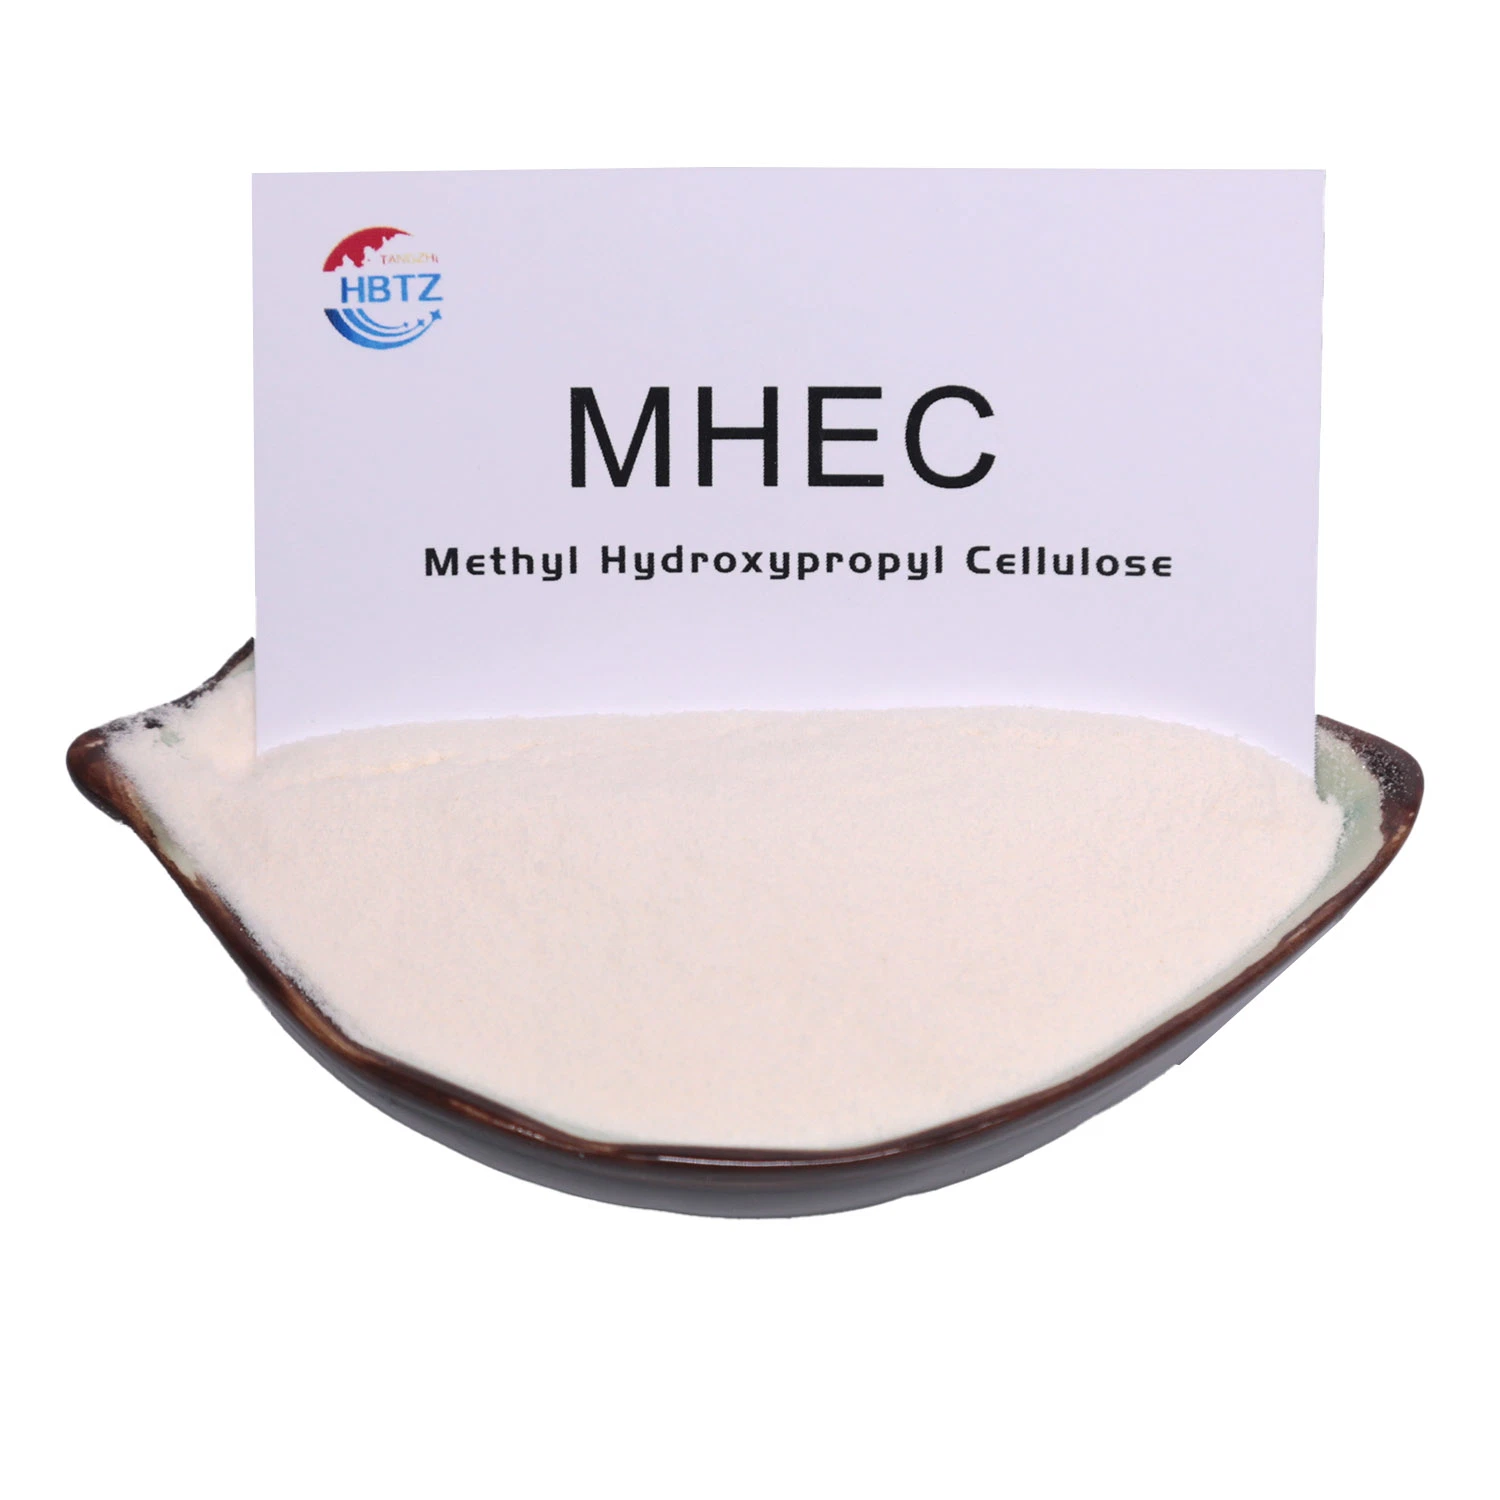 Food and Cosmetics Grade Additives of Mhec Powder for Food Manufacture and Daily-Use Chemical Industry